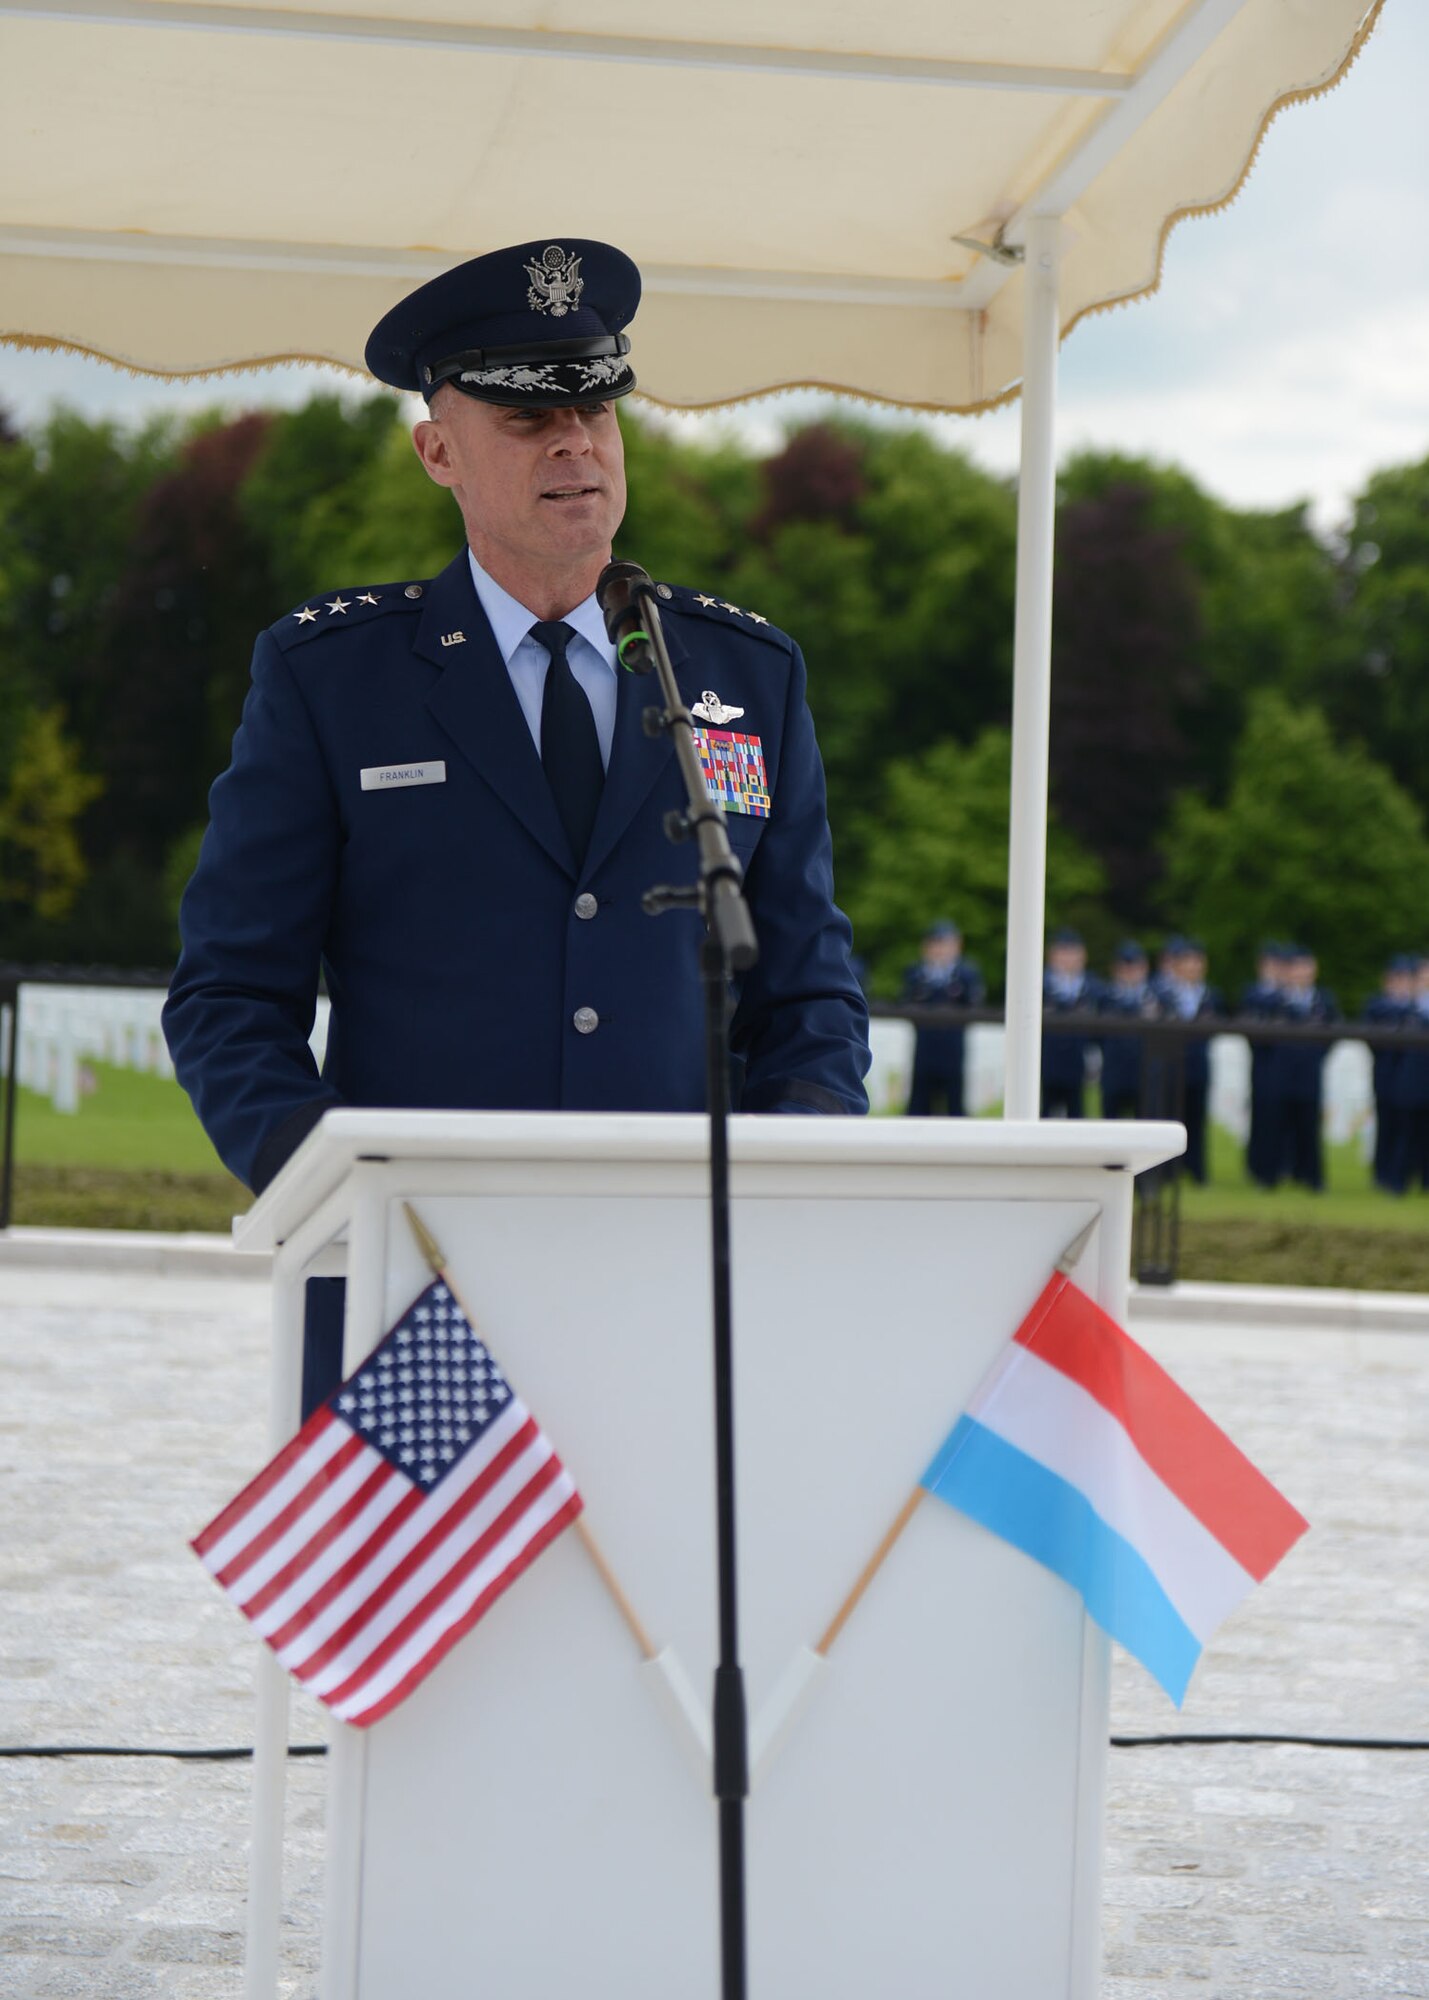 LUXEMBOURG – U.S. Air Force Lt. Gen. Craig Franklin, 3rd Air Force and 17th Expeditionary Air Force commander, speaks during a Memorial Day commemoration at the Luxembourg American Military Cemetery and Memorial May 25, 2013. Franklin thanked all who came to the ceremony for taking the time to honor fellow comrades-in-arms who will never be forgotten. (U.S. Air Force photo by Airman 1st Class Gustavo Castillo/Released)